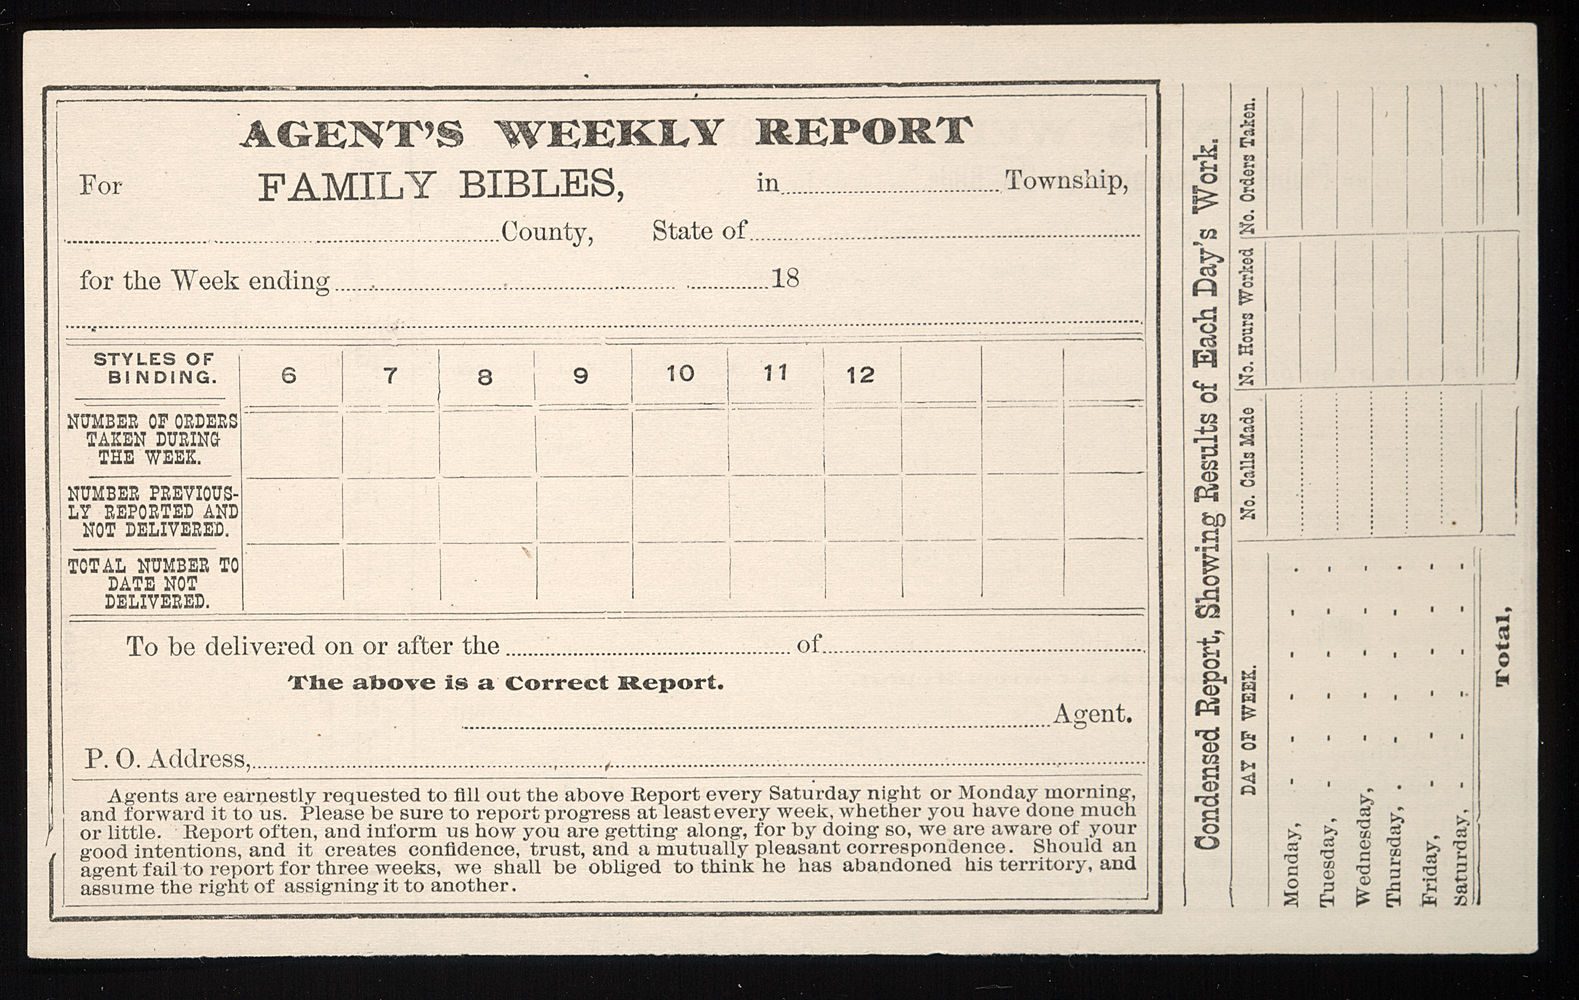 a form for submitting an Agent's Weekly Report of sales data